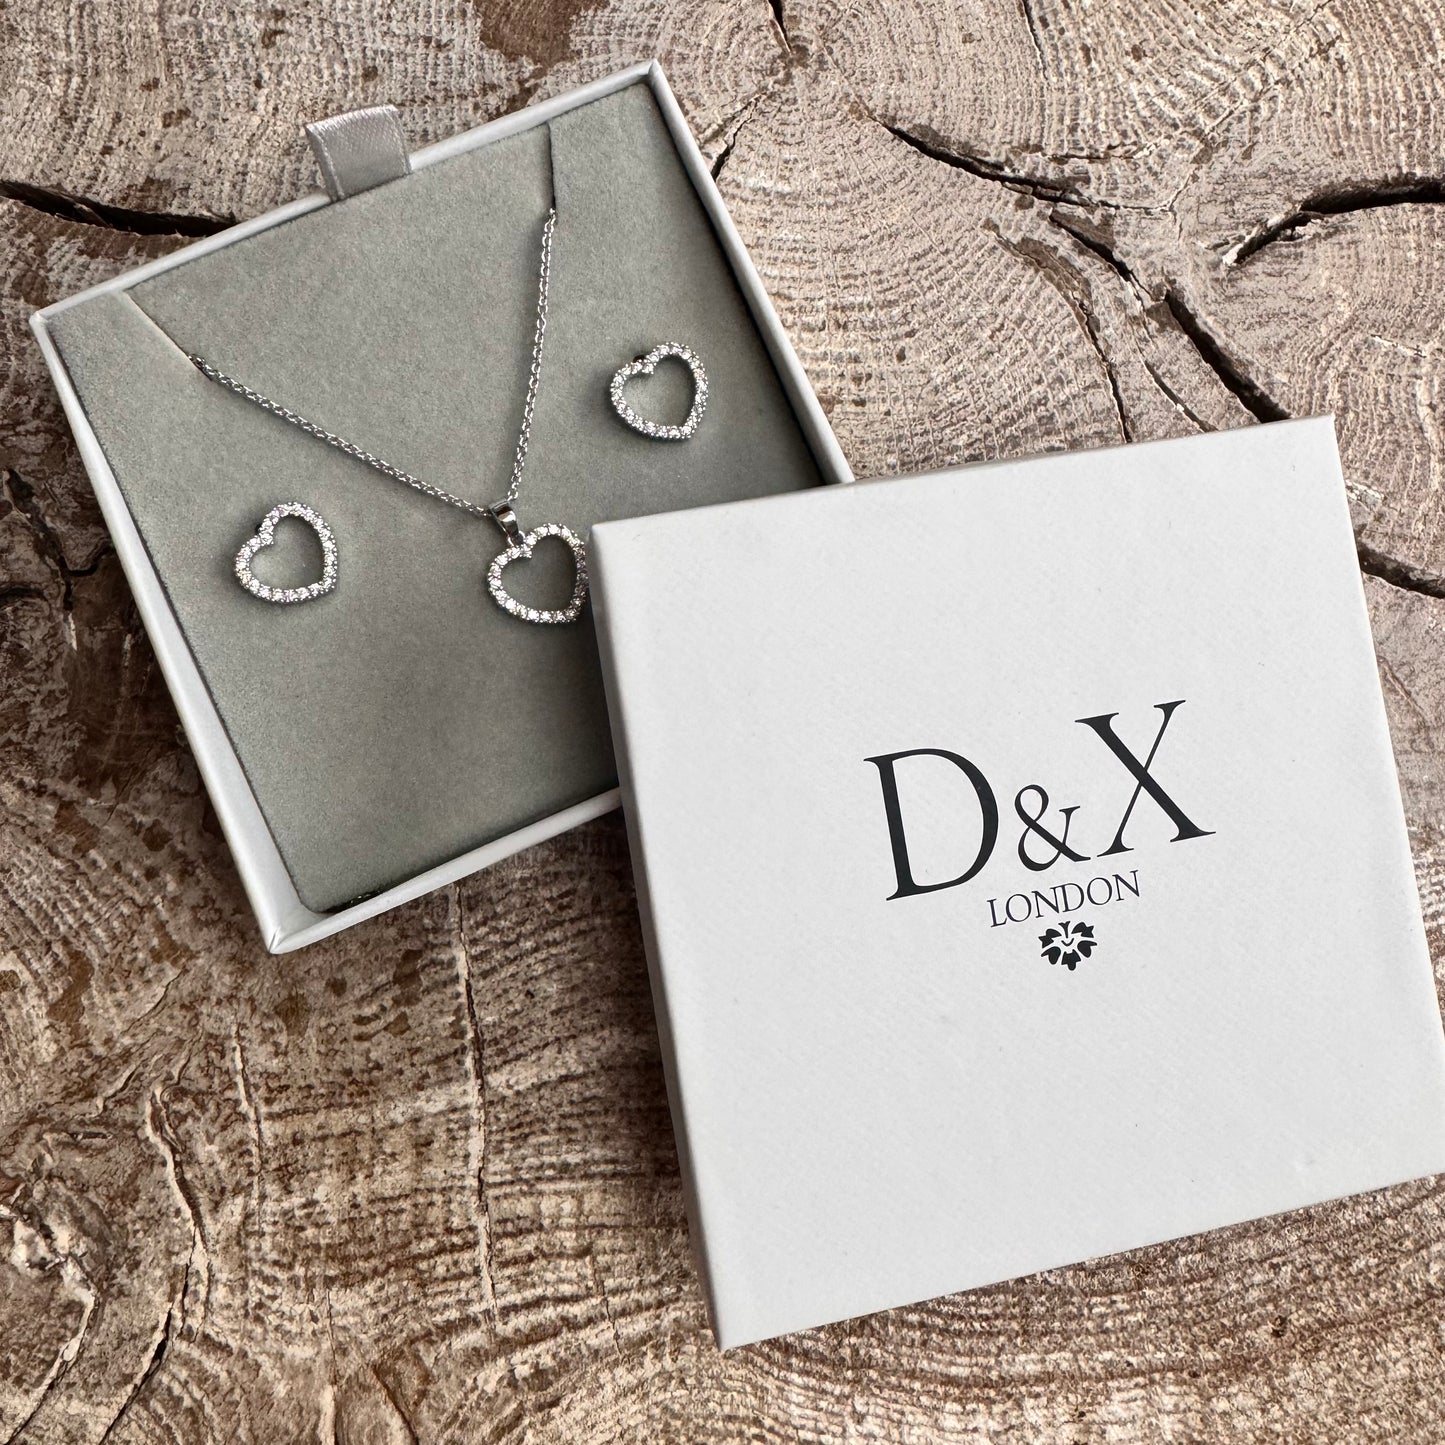 D&X Heart diamante earring and necklace set